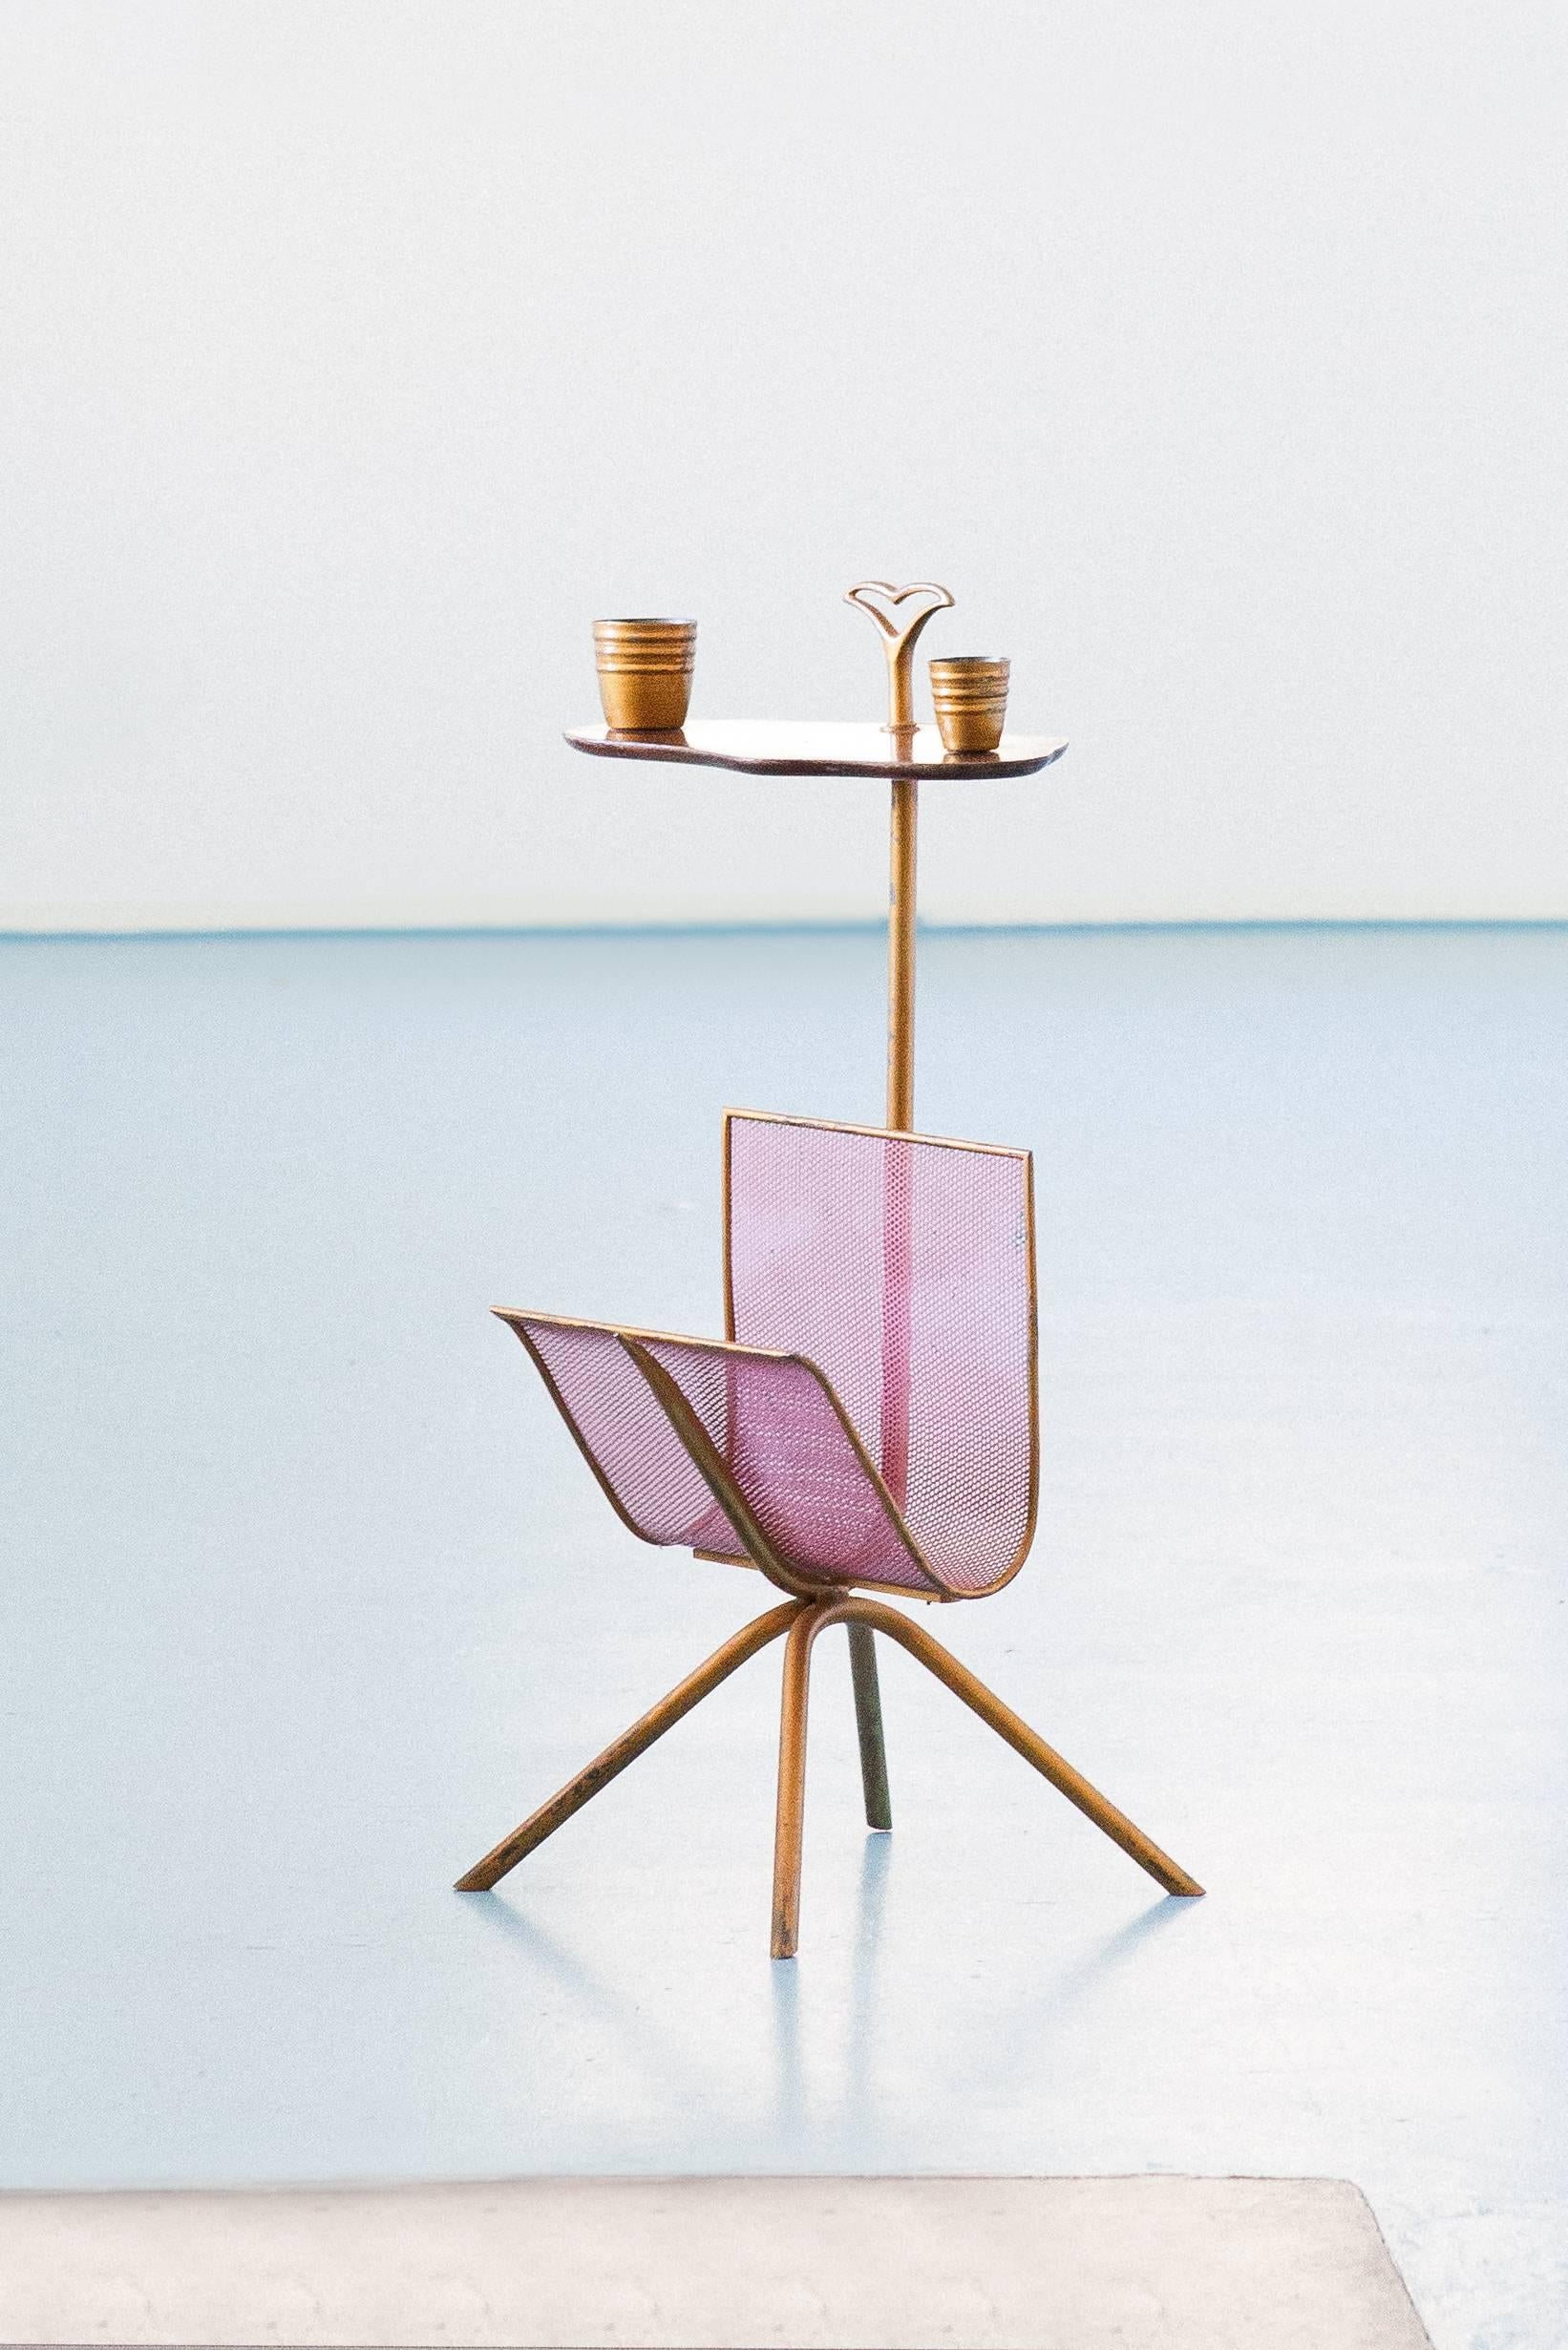 A side table with magazine rack, manufactured in Italy in 1950s.
Solid brass gold paint finished frame with original patina , little mahogany wooden plane and four little brass glasses coordinated .
The magazine holder is pink enameled.

This is